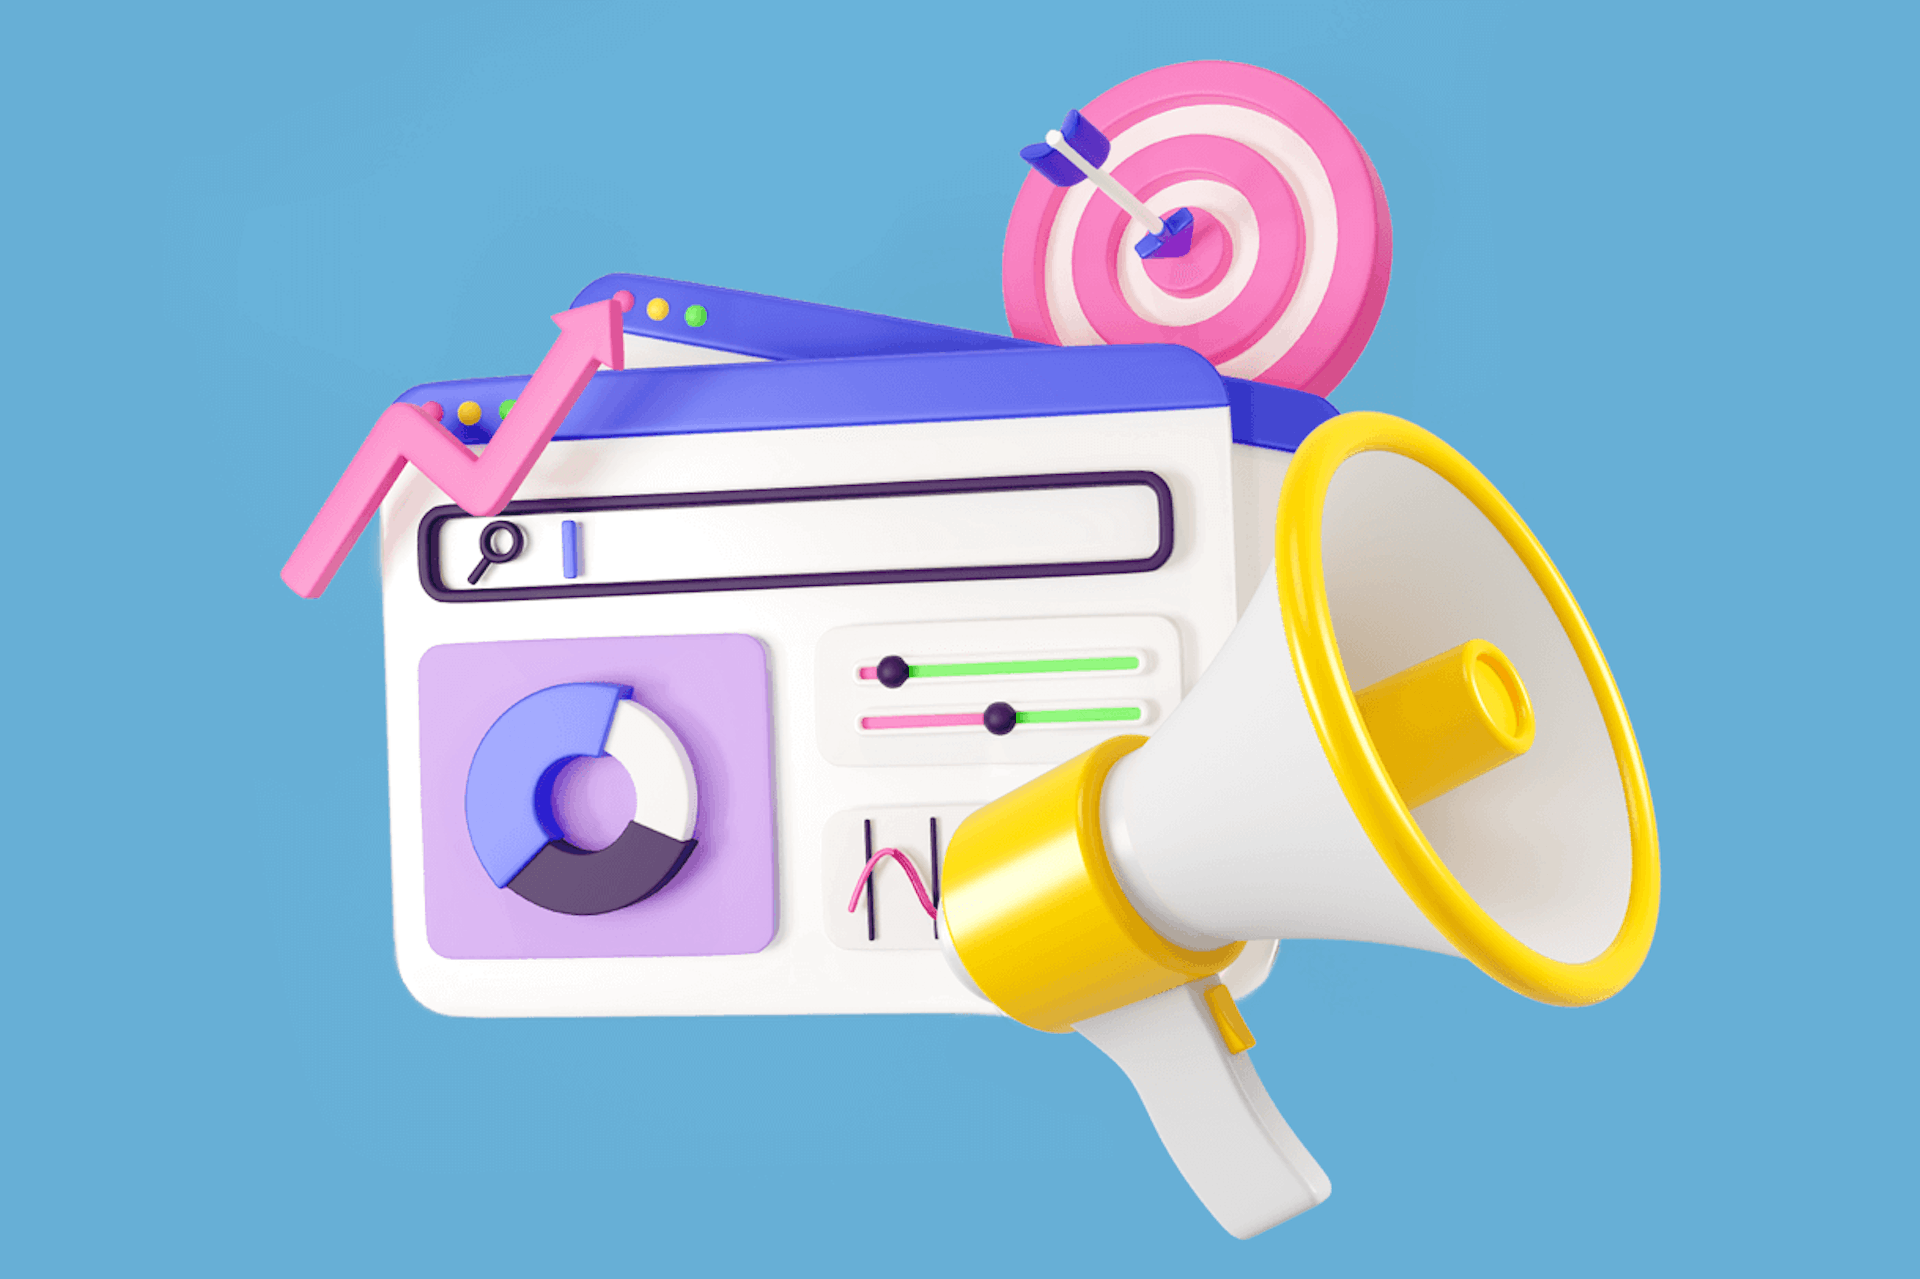 Image showing a large yellow and white megaphone in front of social media profiles and a pink and white target with a purple arrow in the bullseye. Marketing communication strategy blog post.